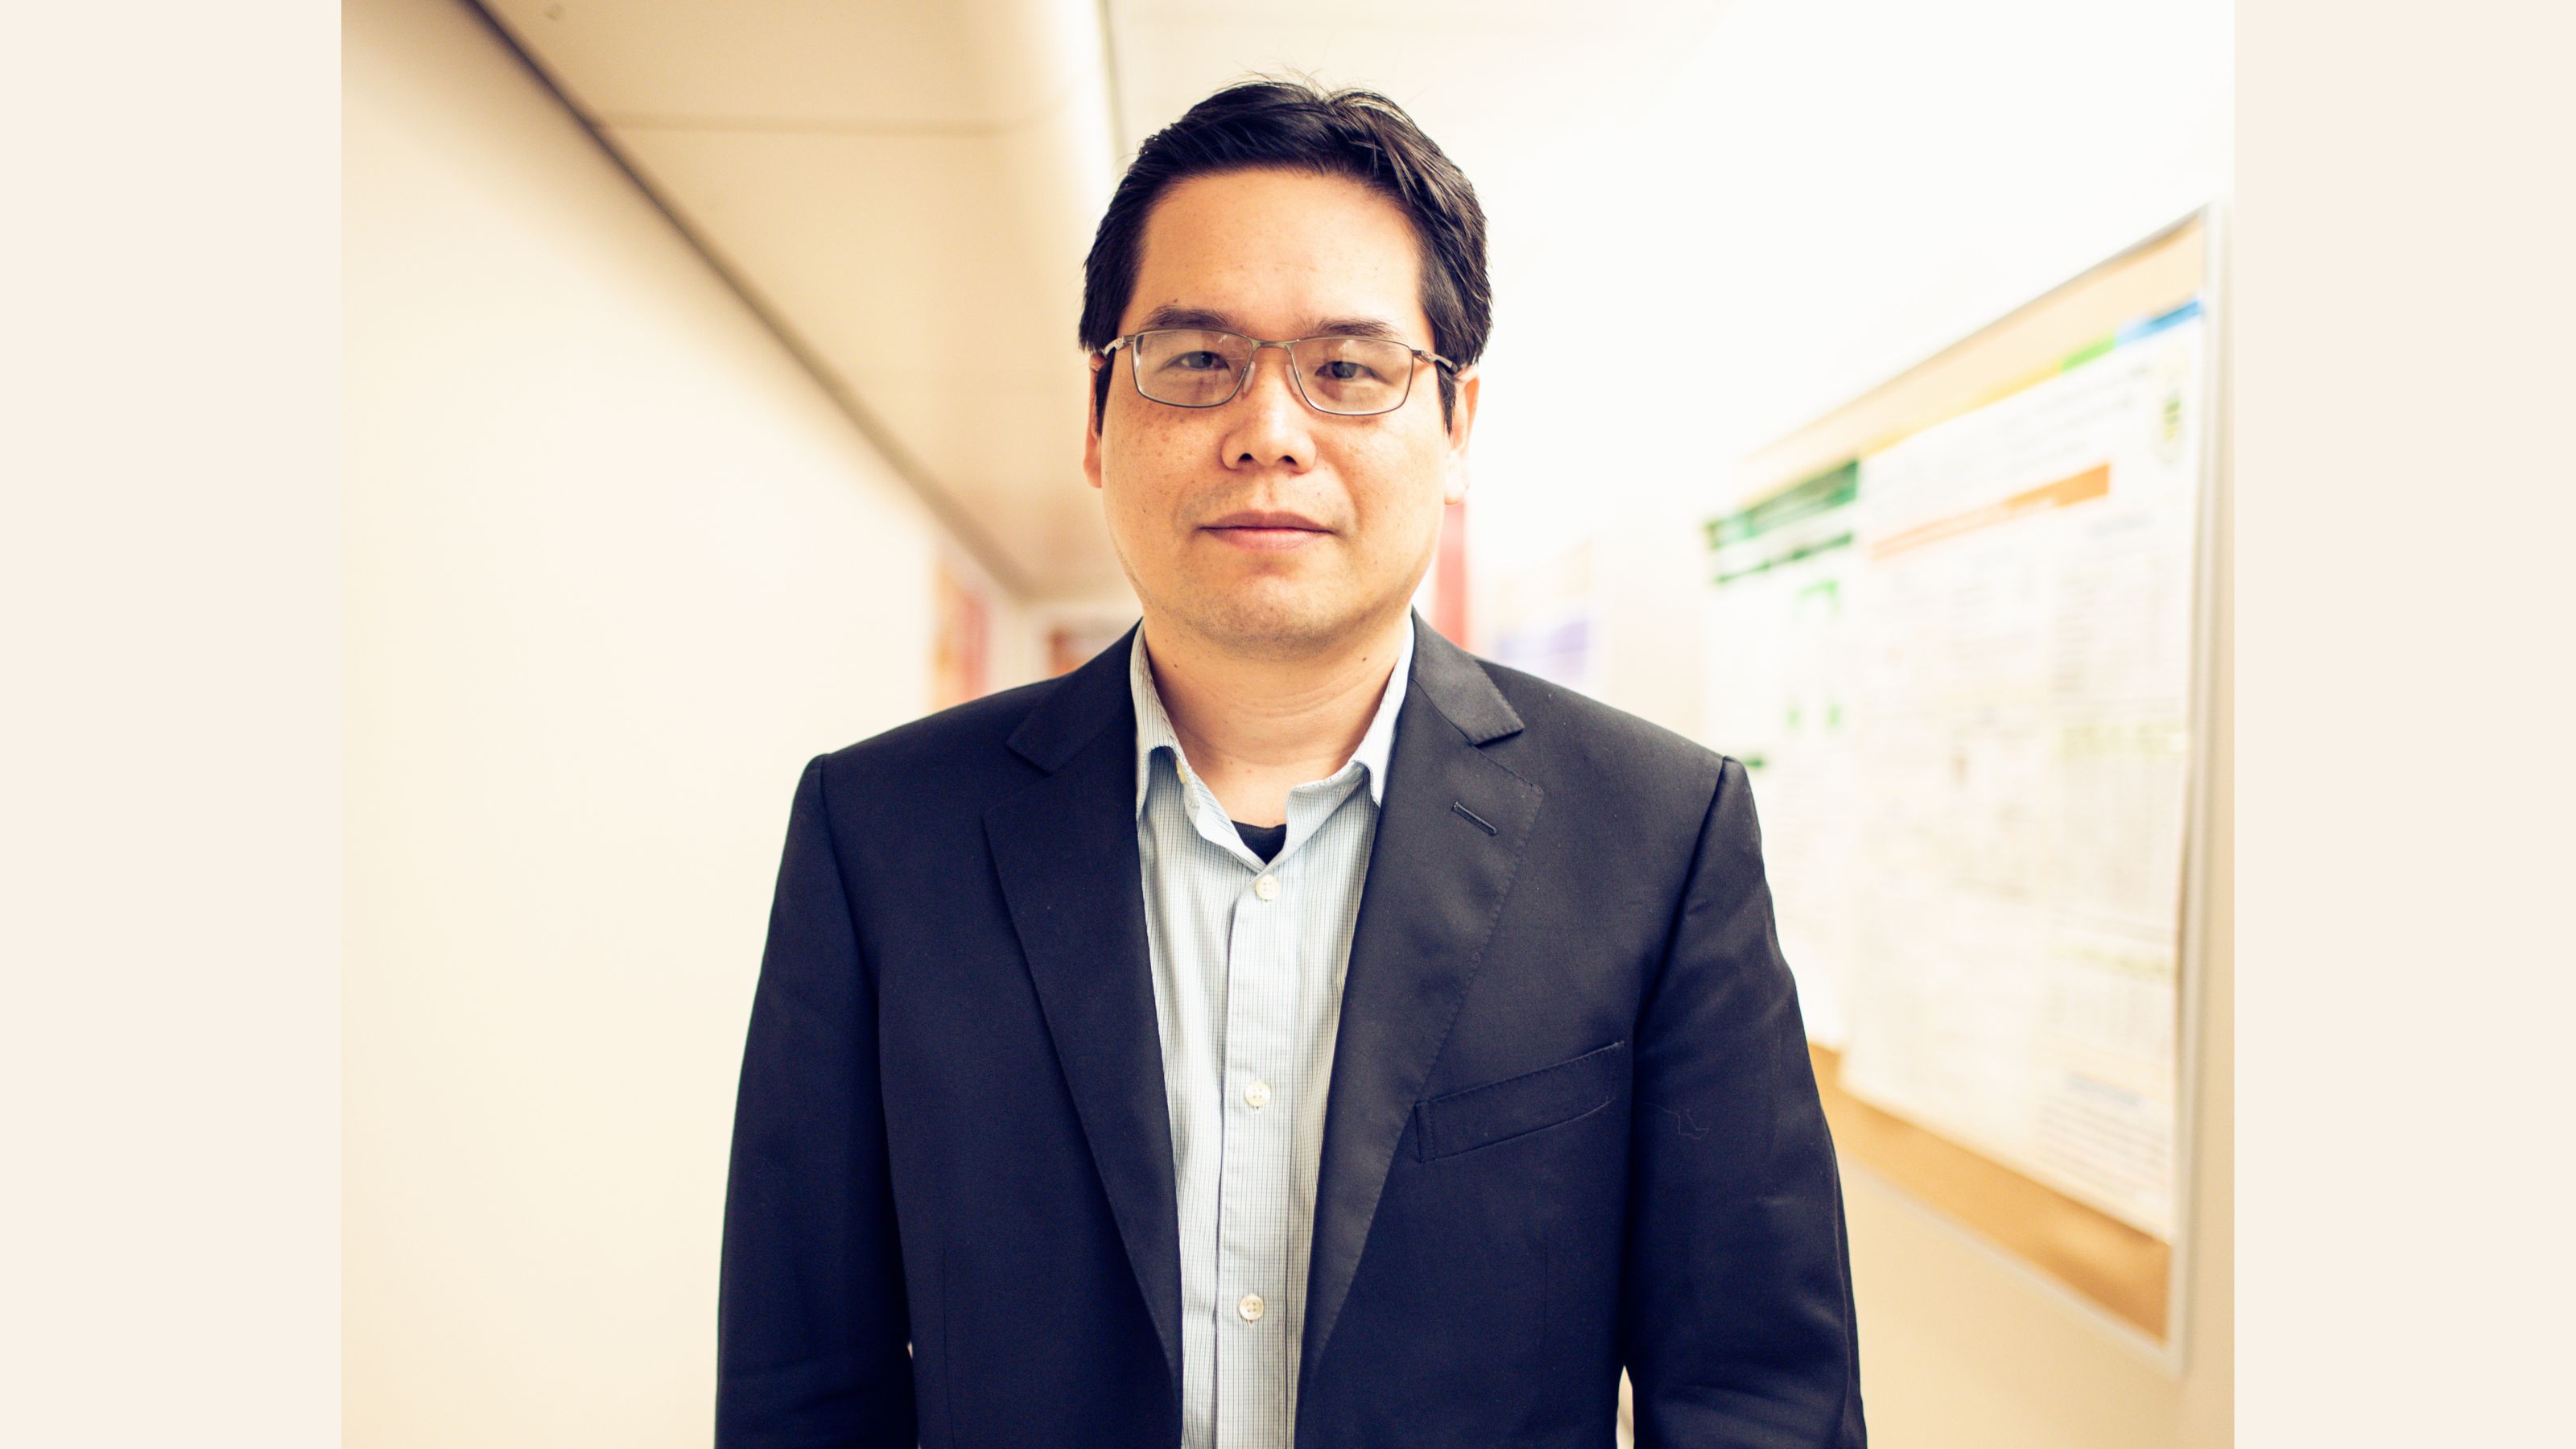 Tony Kiang, Associate Professor with the Faculty of Pharmacy and Pharmaceutical Sciences